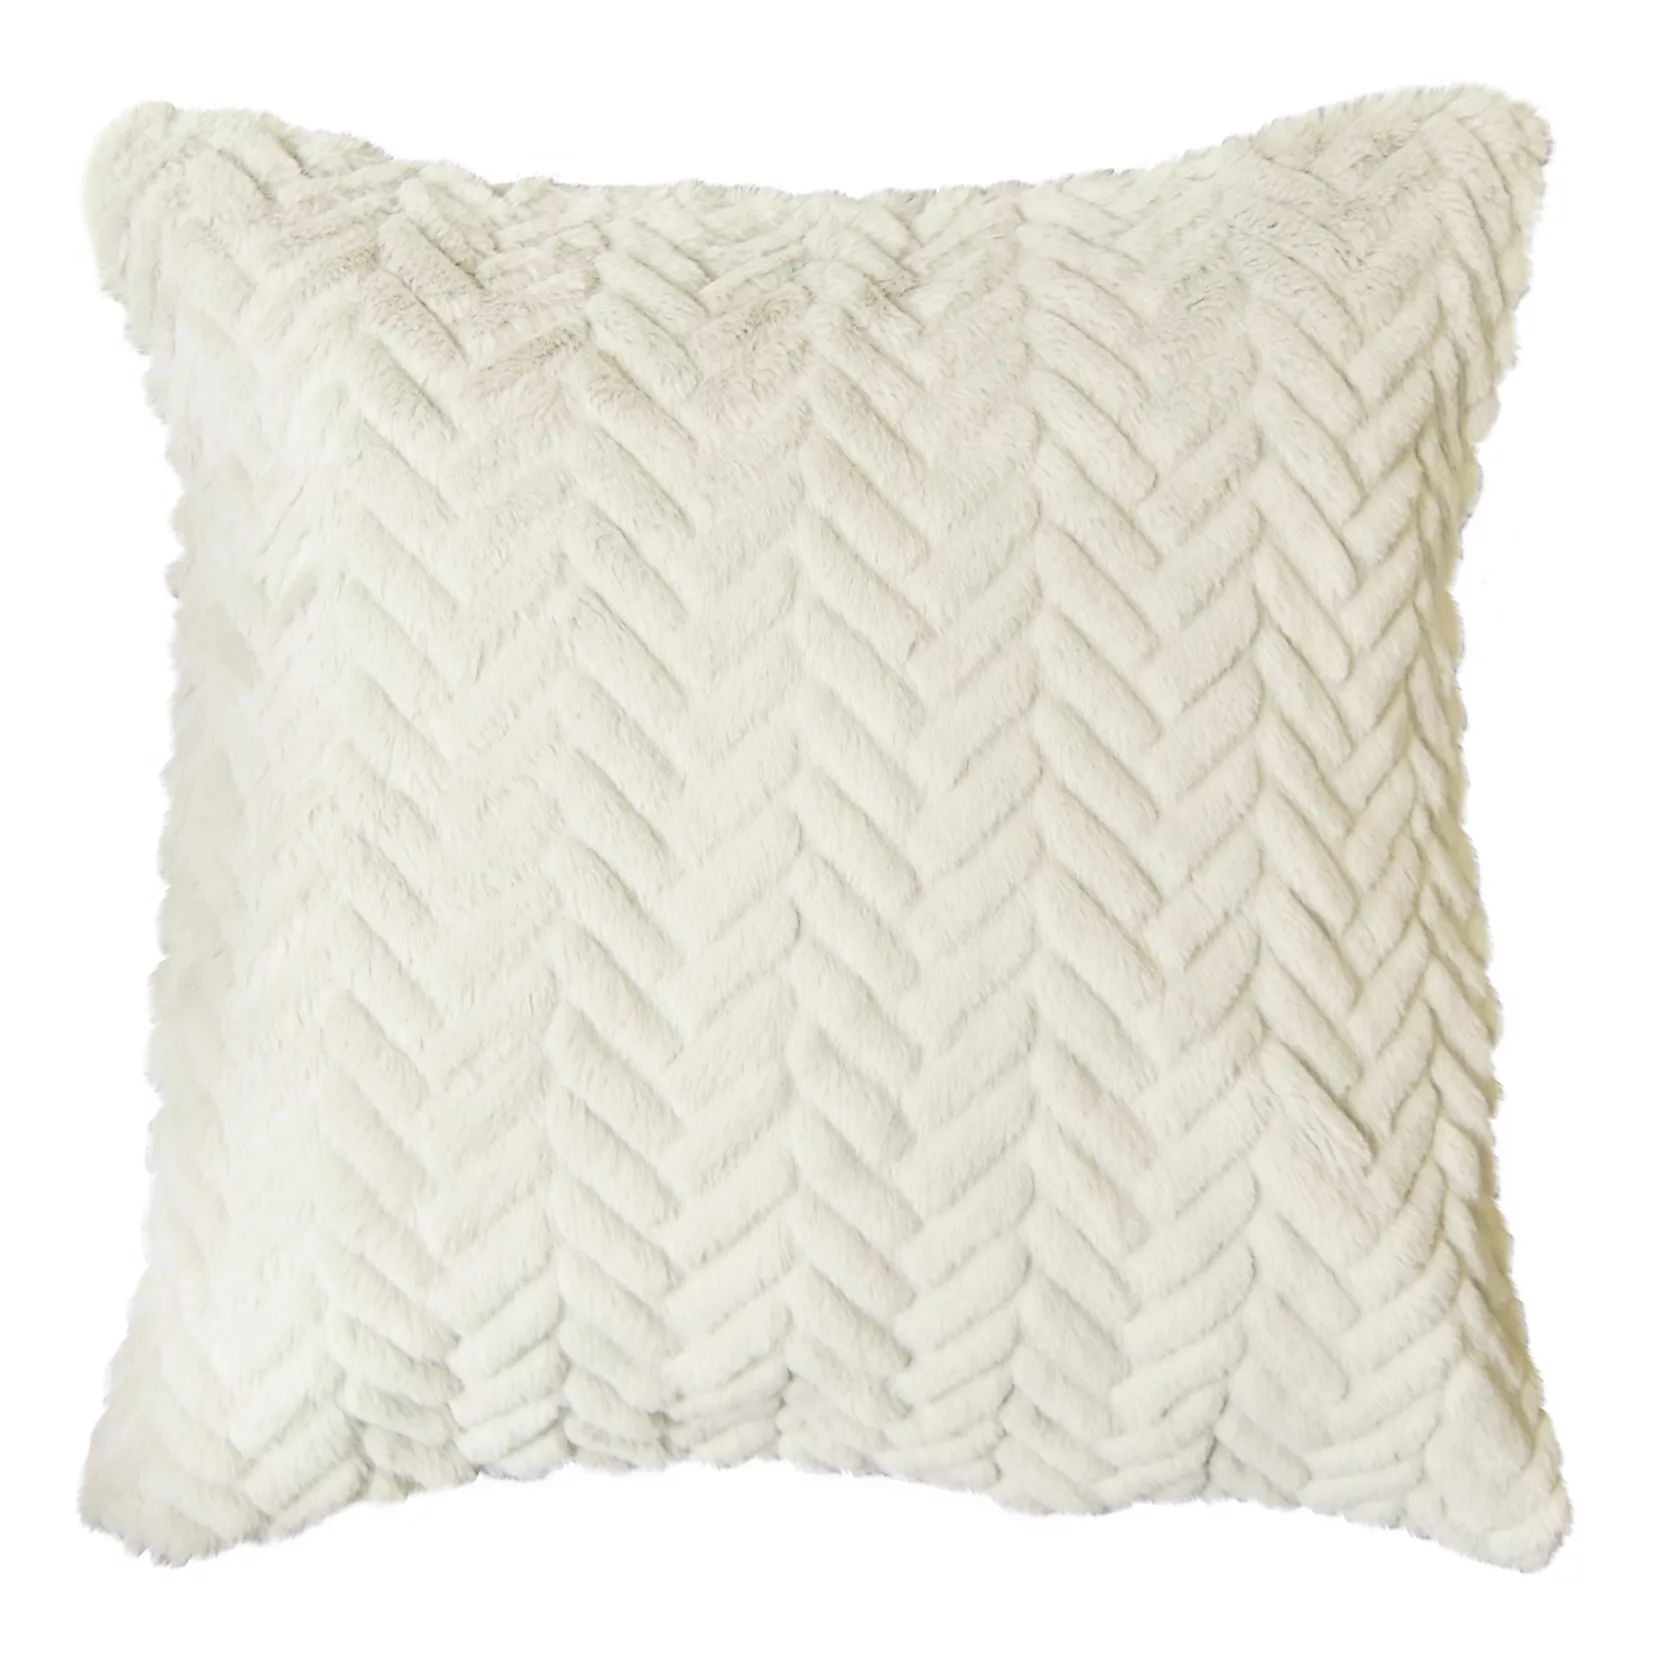 Spencer Home Decor Toby Faux Fur Throw Pillow | Kohl's